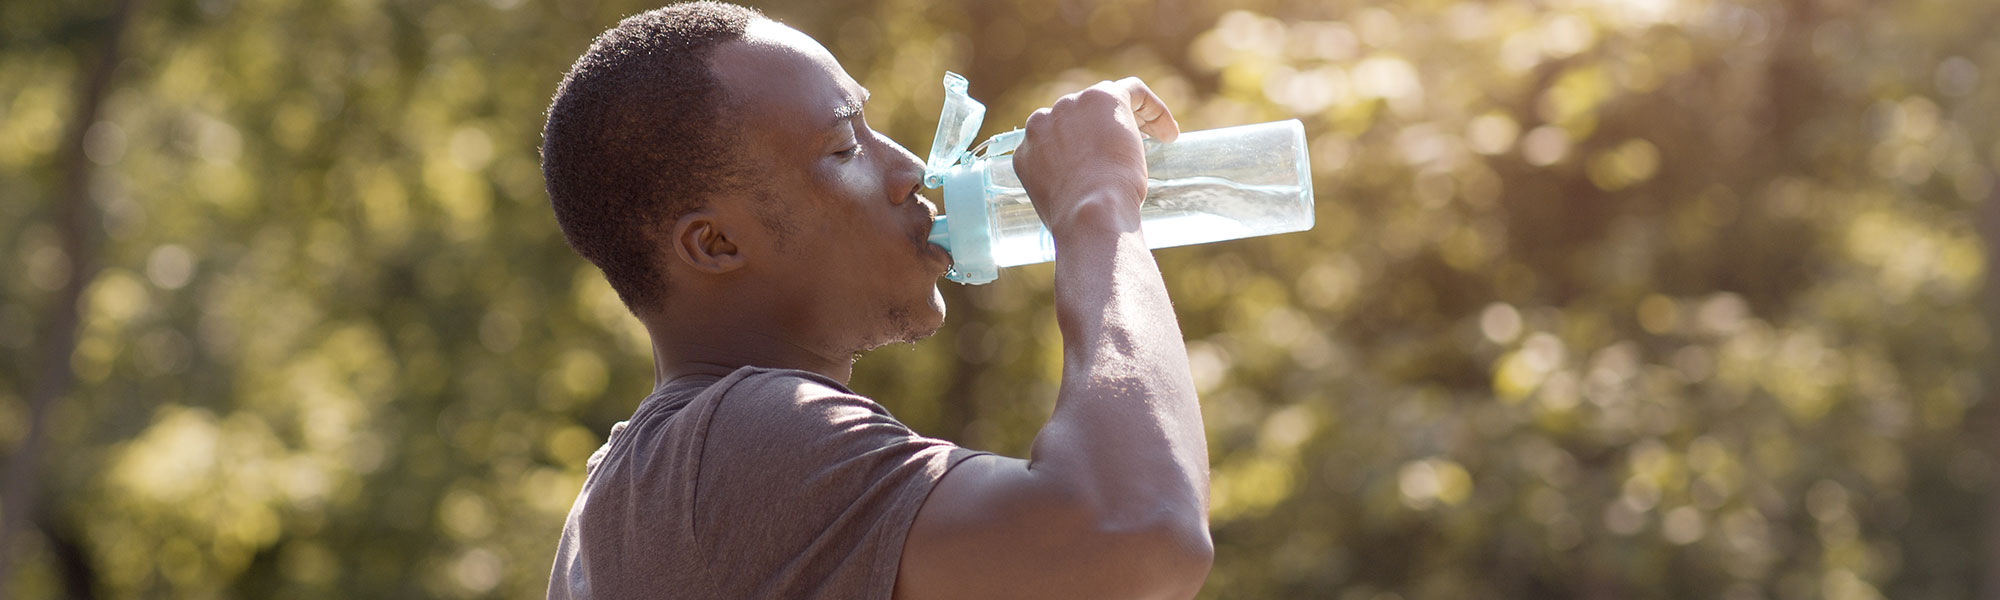 Man drinking water from a water bottle while outside on a hot day